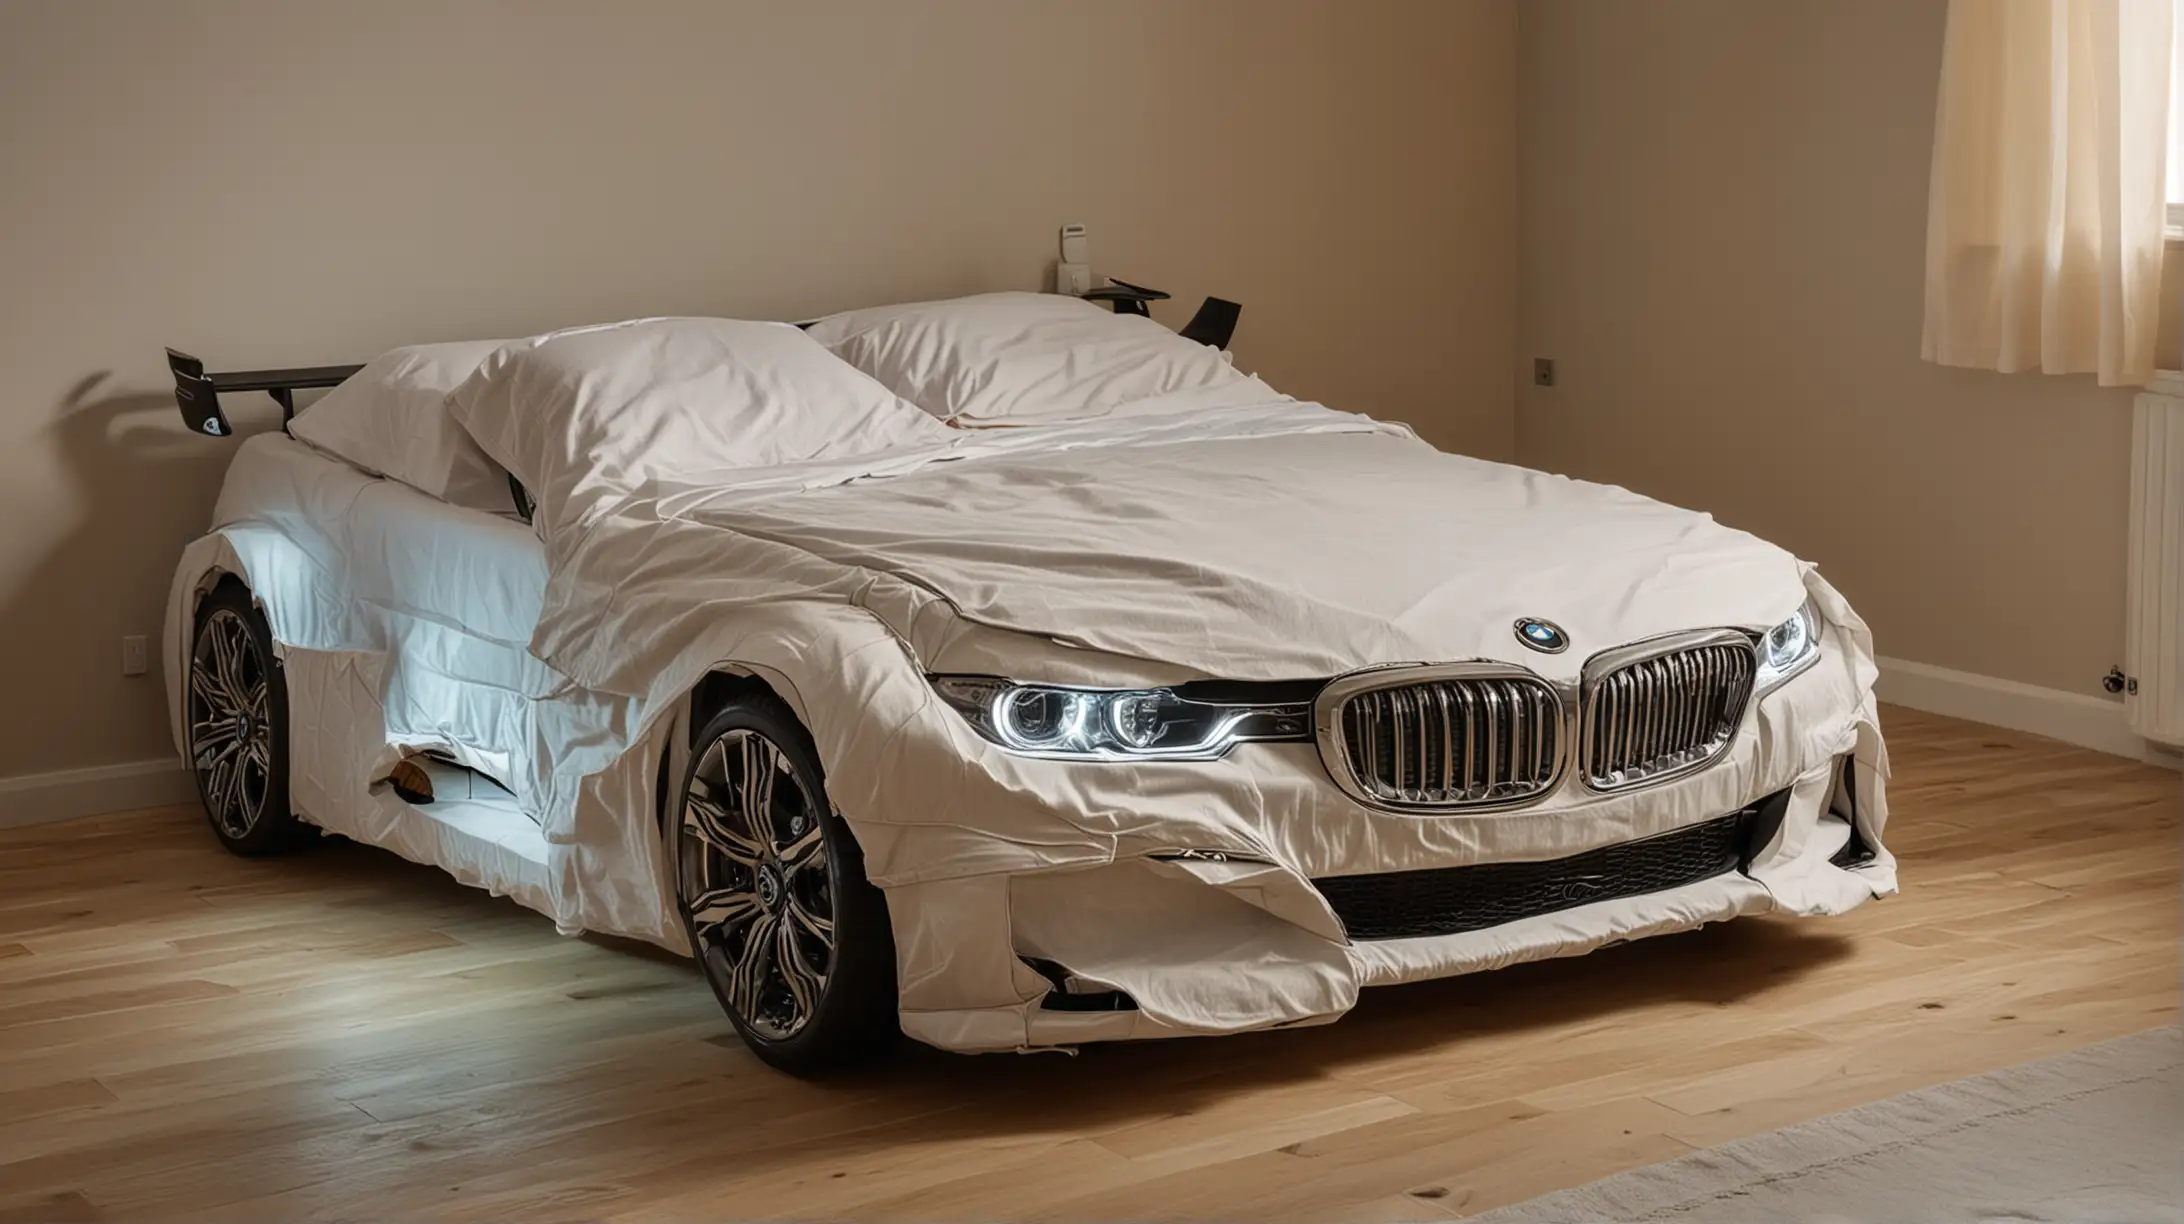 Luxurious TwoBedroom Suite with BMW Car Bed and Illuminated Headlights